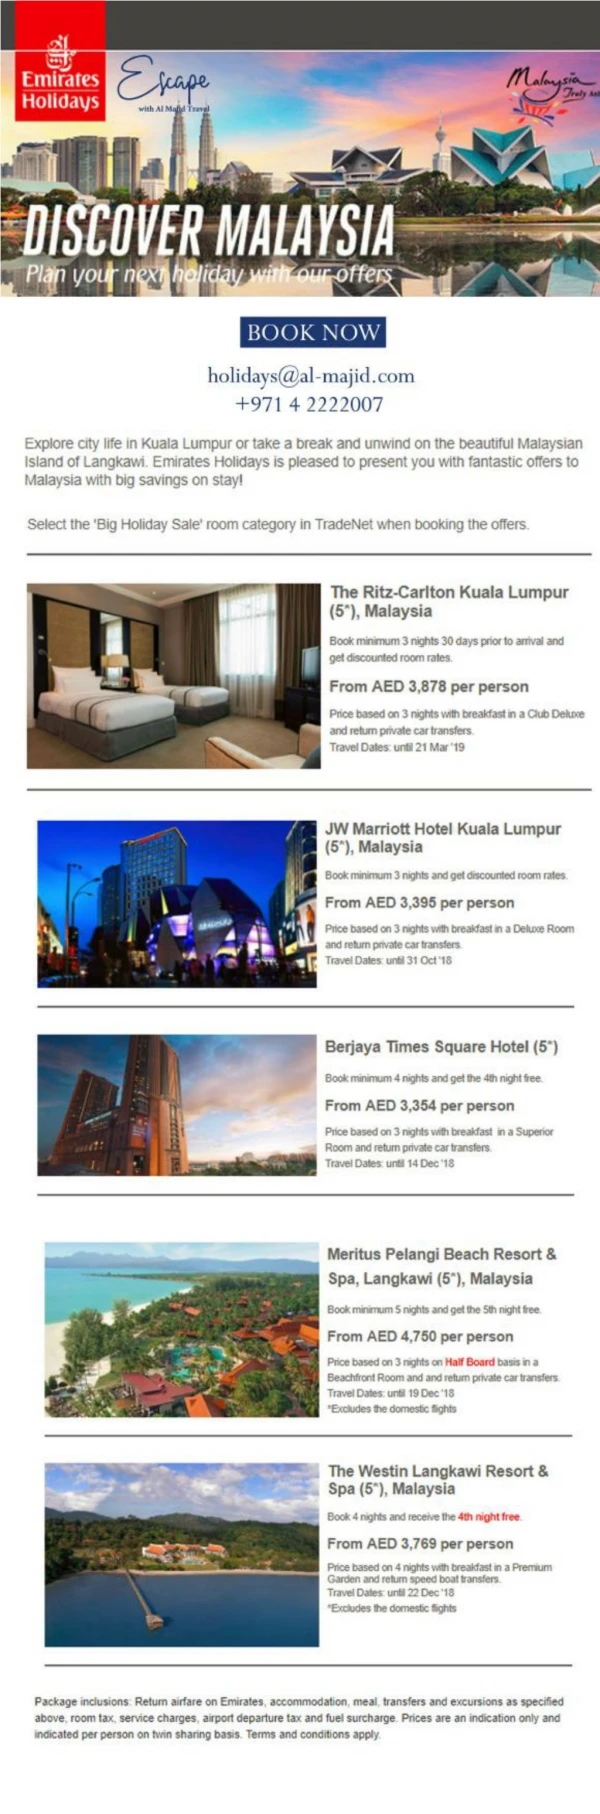 Holiday packages from Dubai